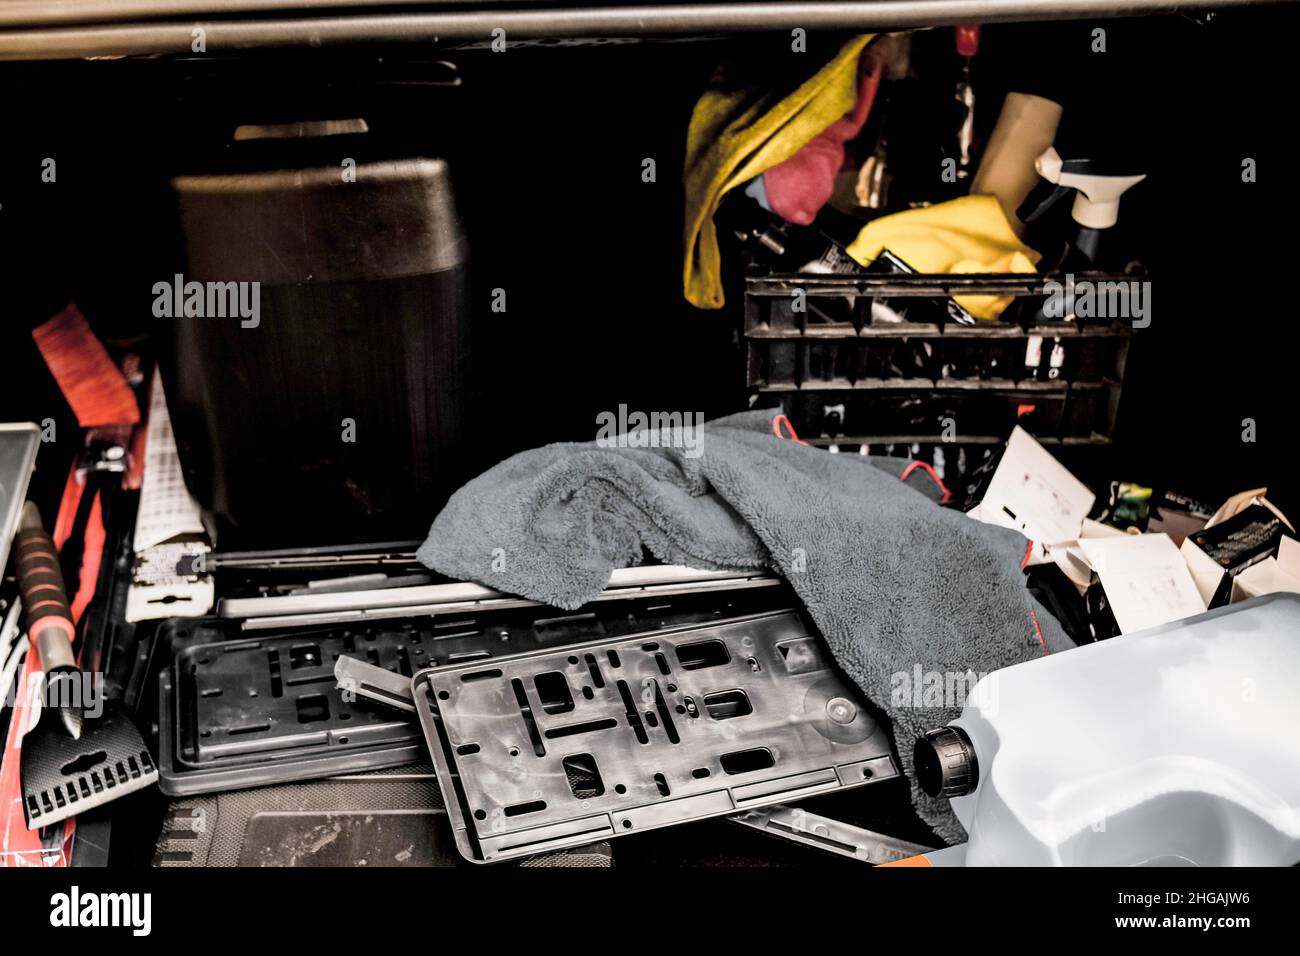 Open trunk of a car in which a mess.Tools and debris in the trunk Stock Photo